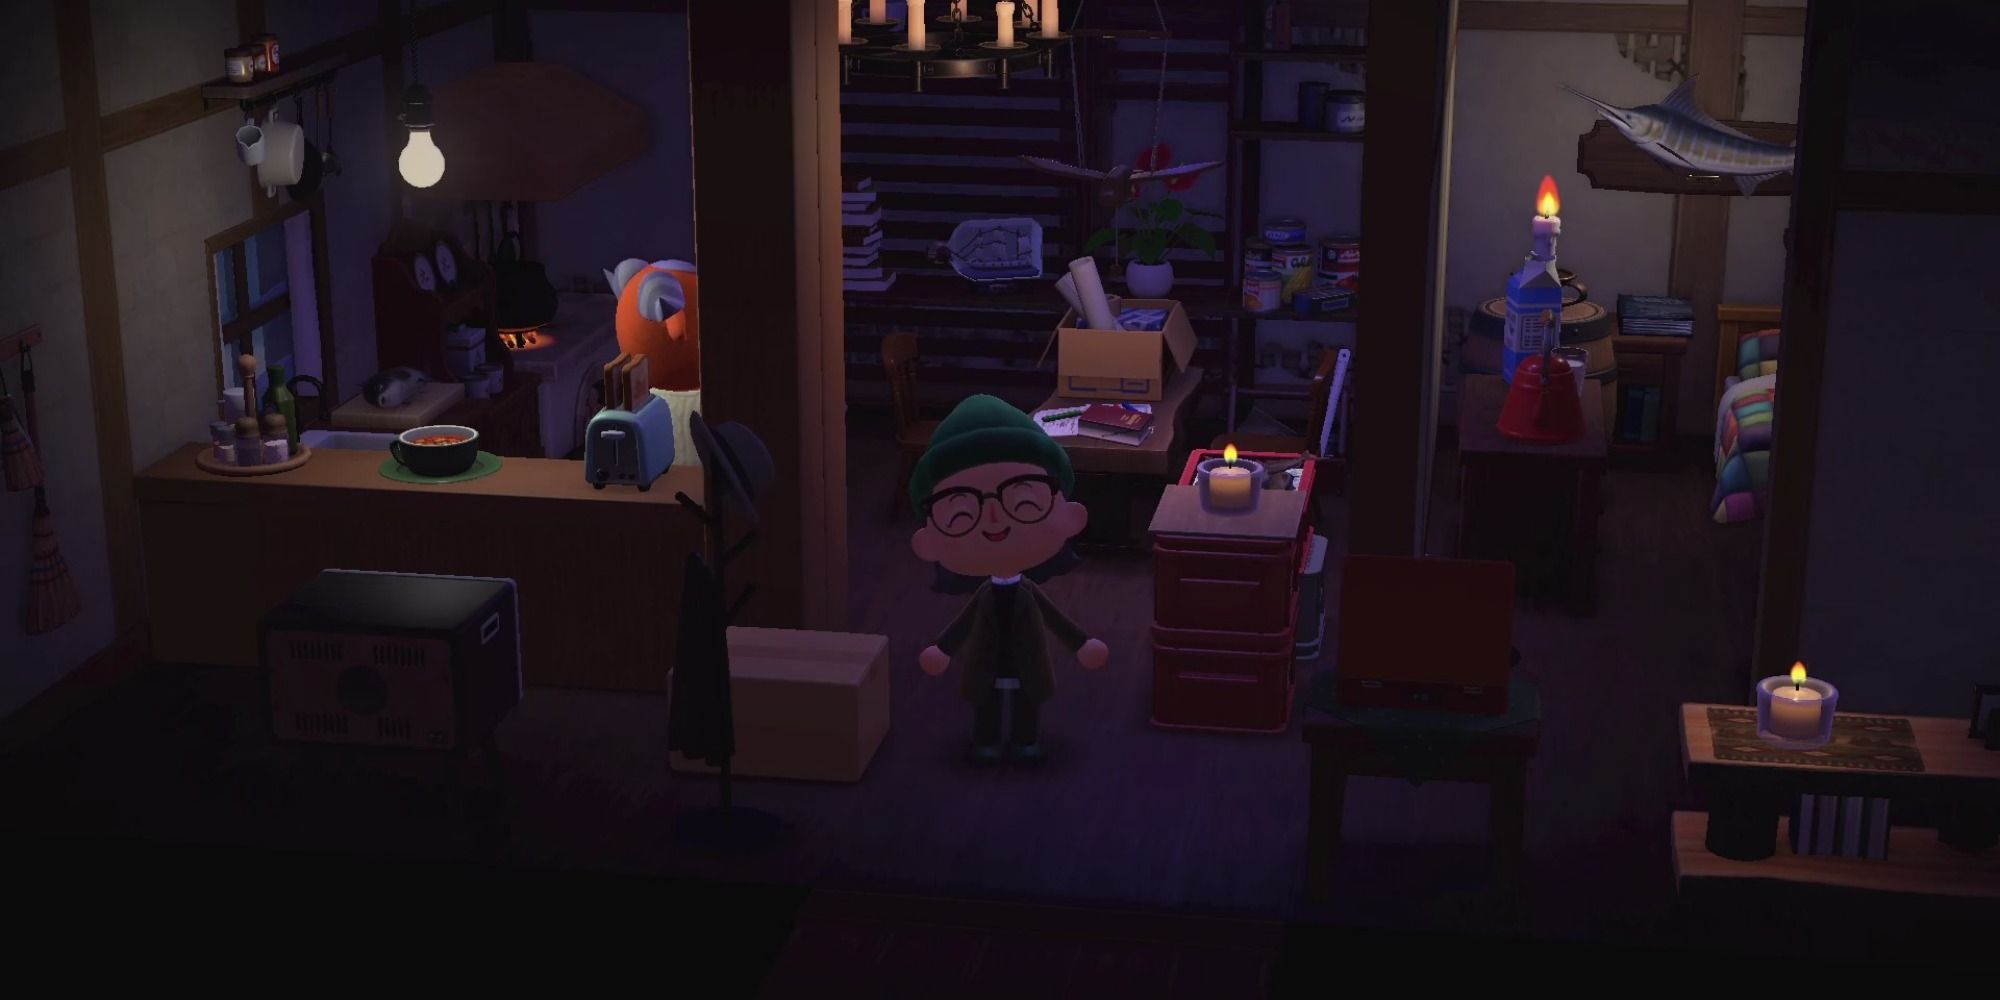 A player stands in a dark and cluttered room filled with cardboard boxes and boxes of fish